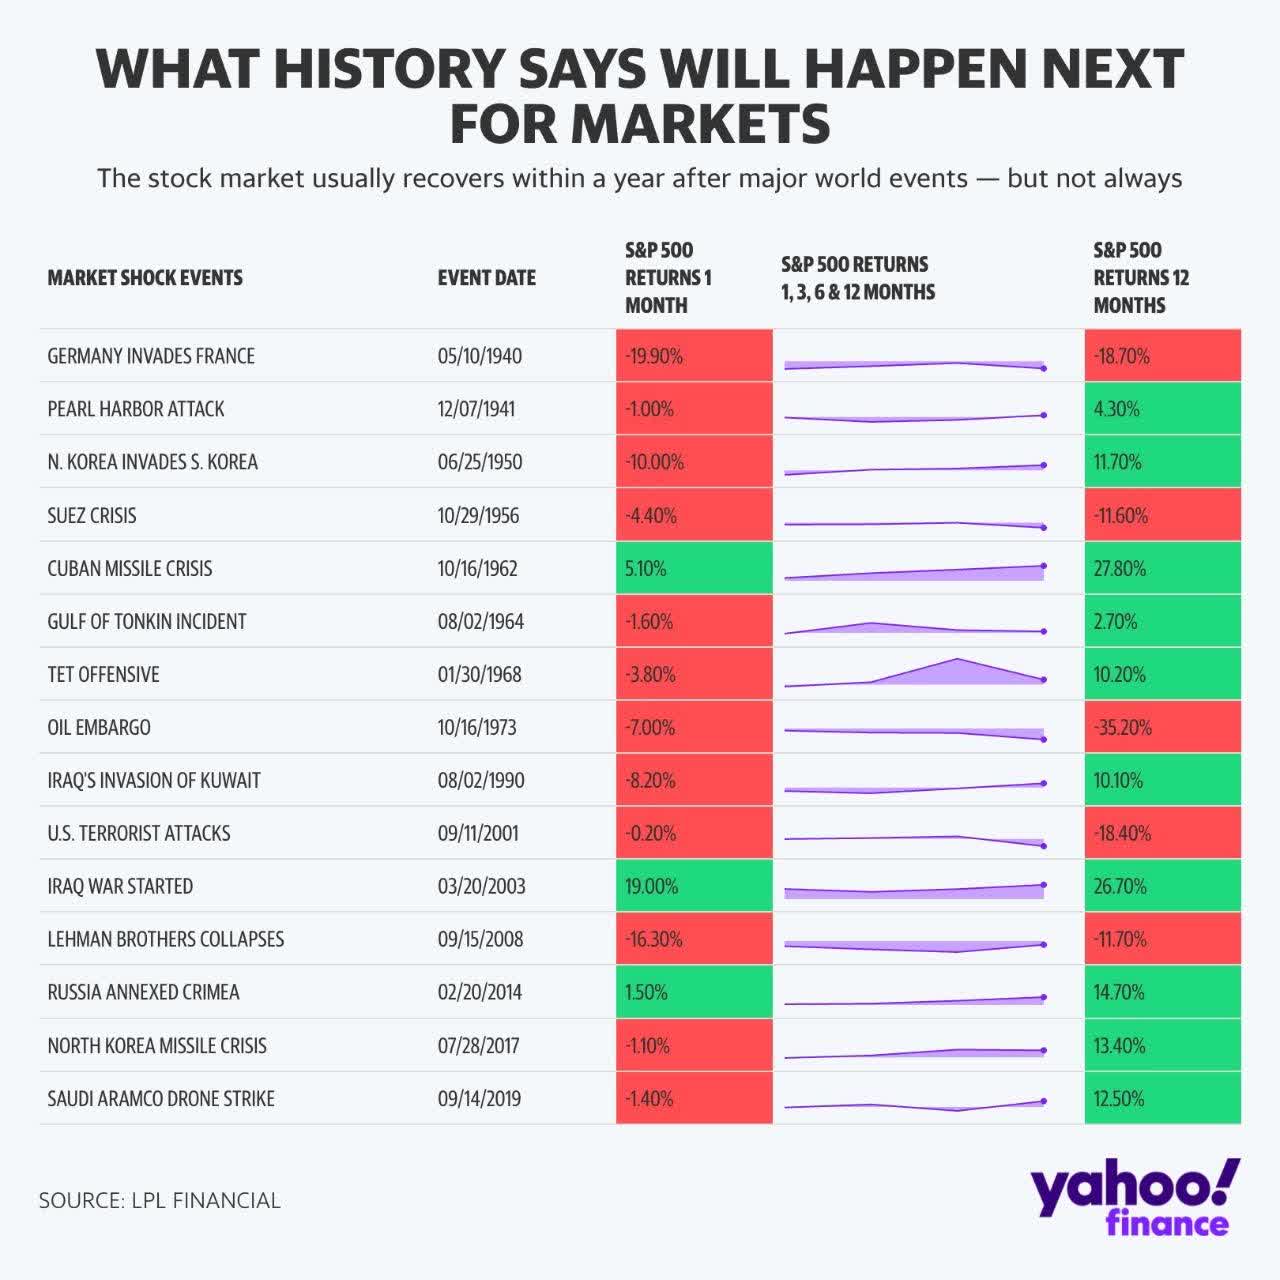 How markets responded to world events in history.